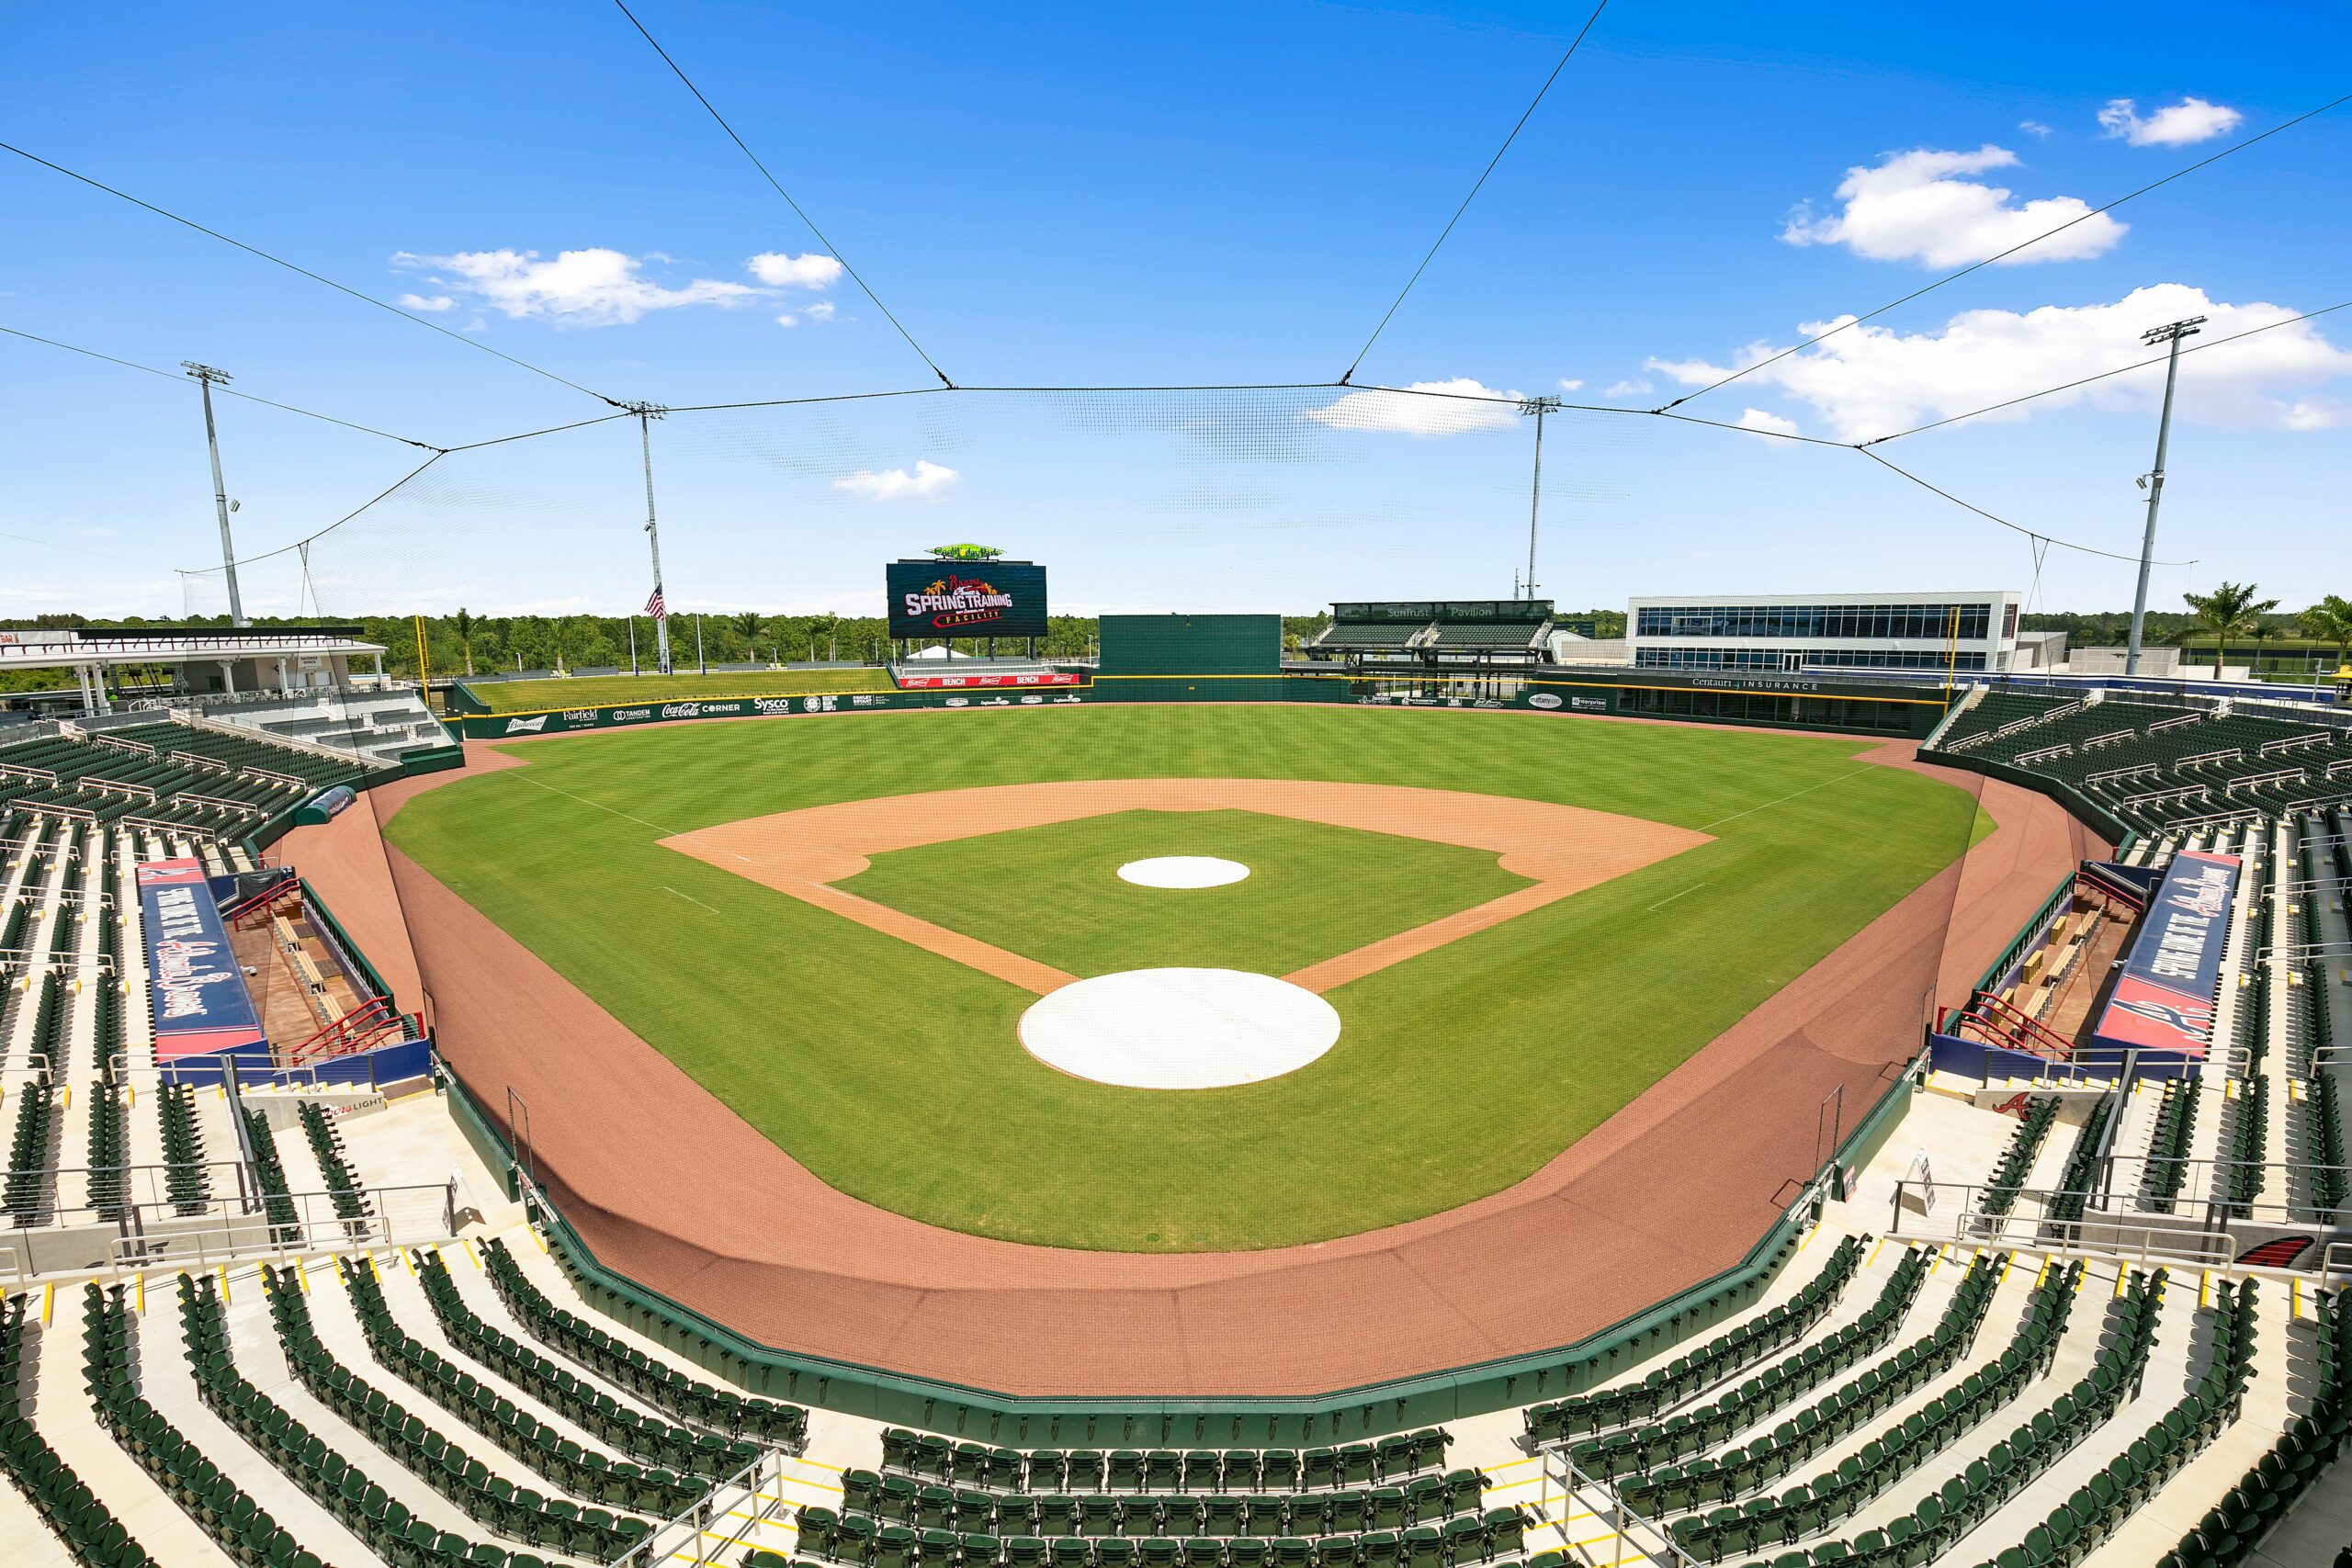 A view of the Atlanta Braves Spring Training stadium CoolToday Park from behind home plate